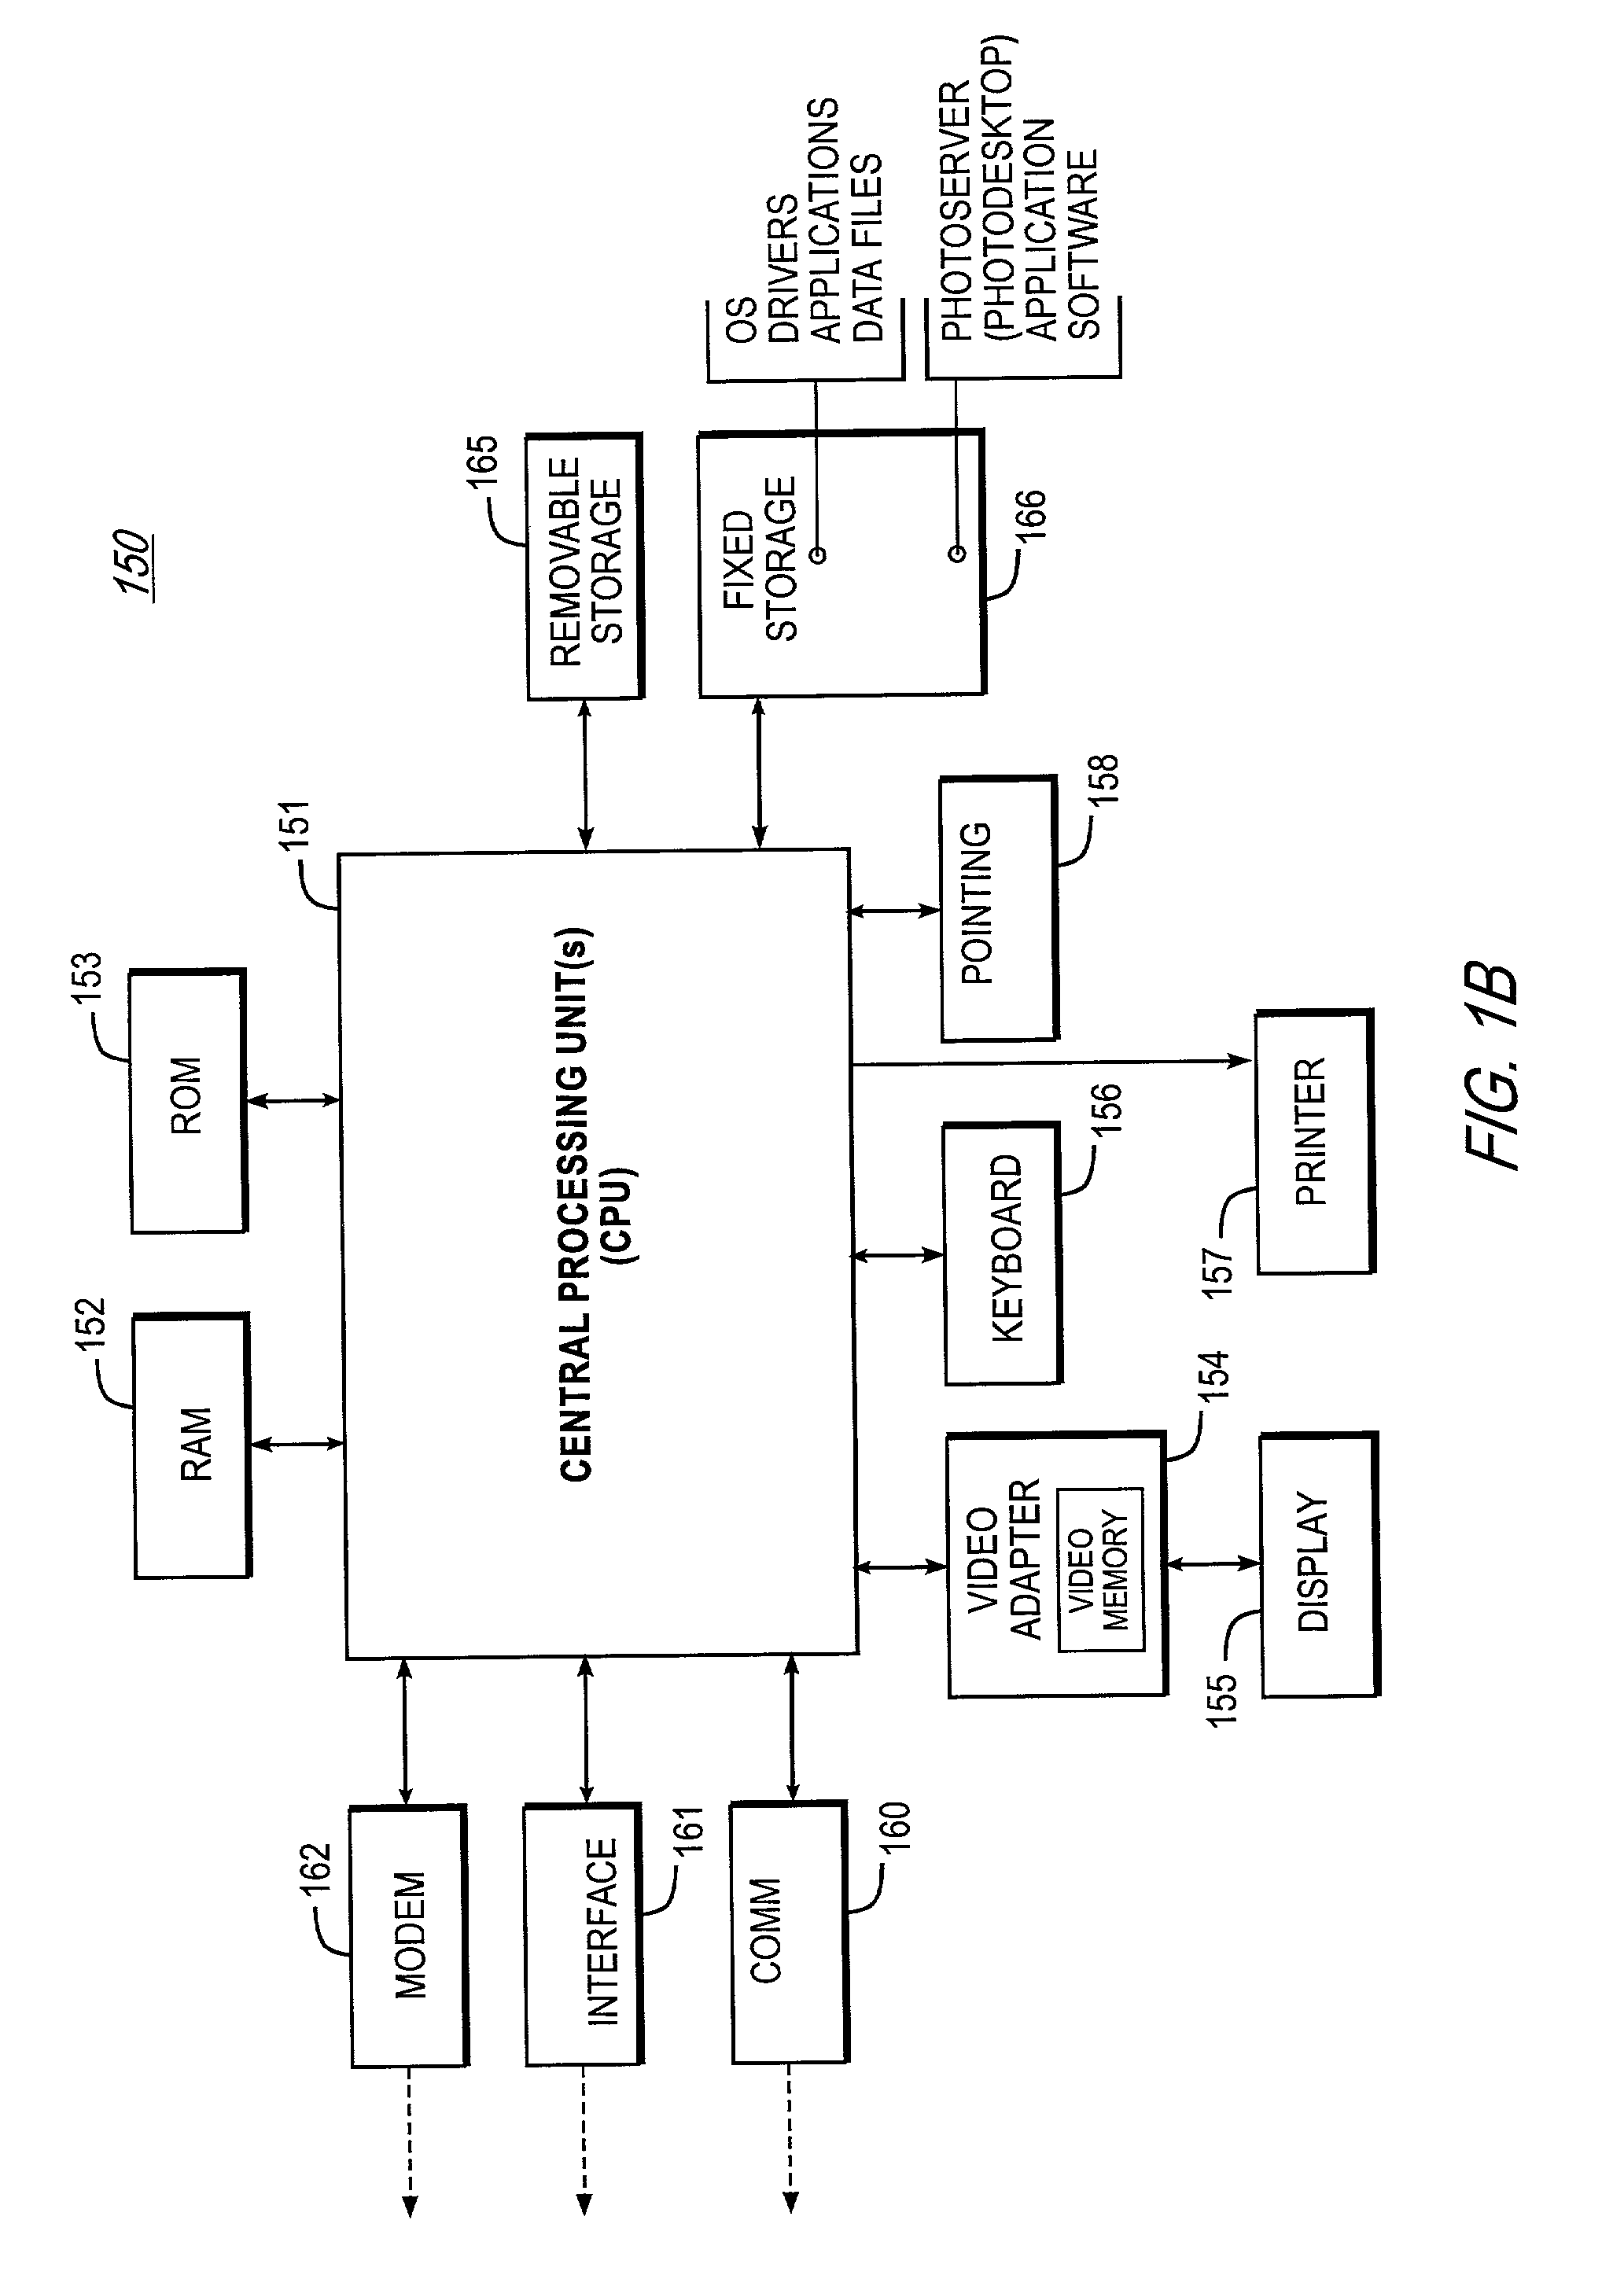 Digital camera device providing improved methodology for rapidly taking successive pictures